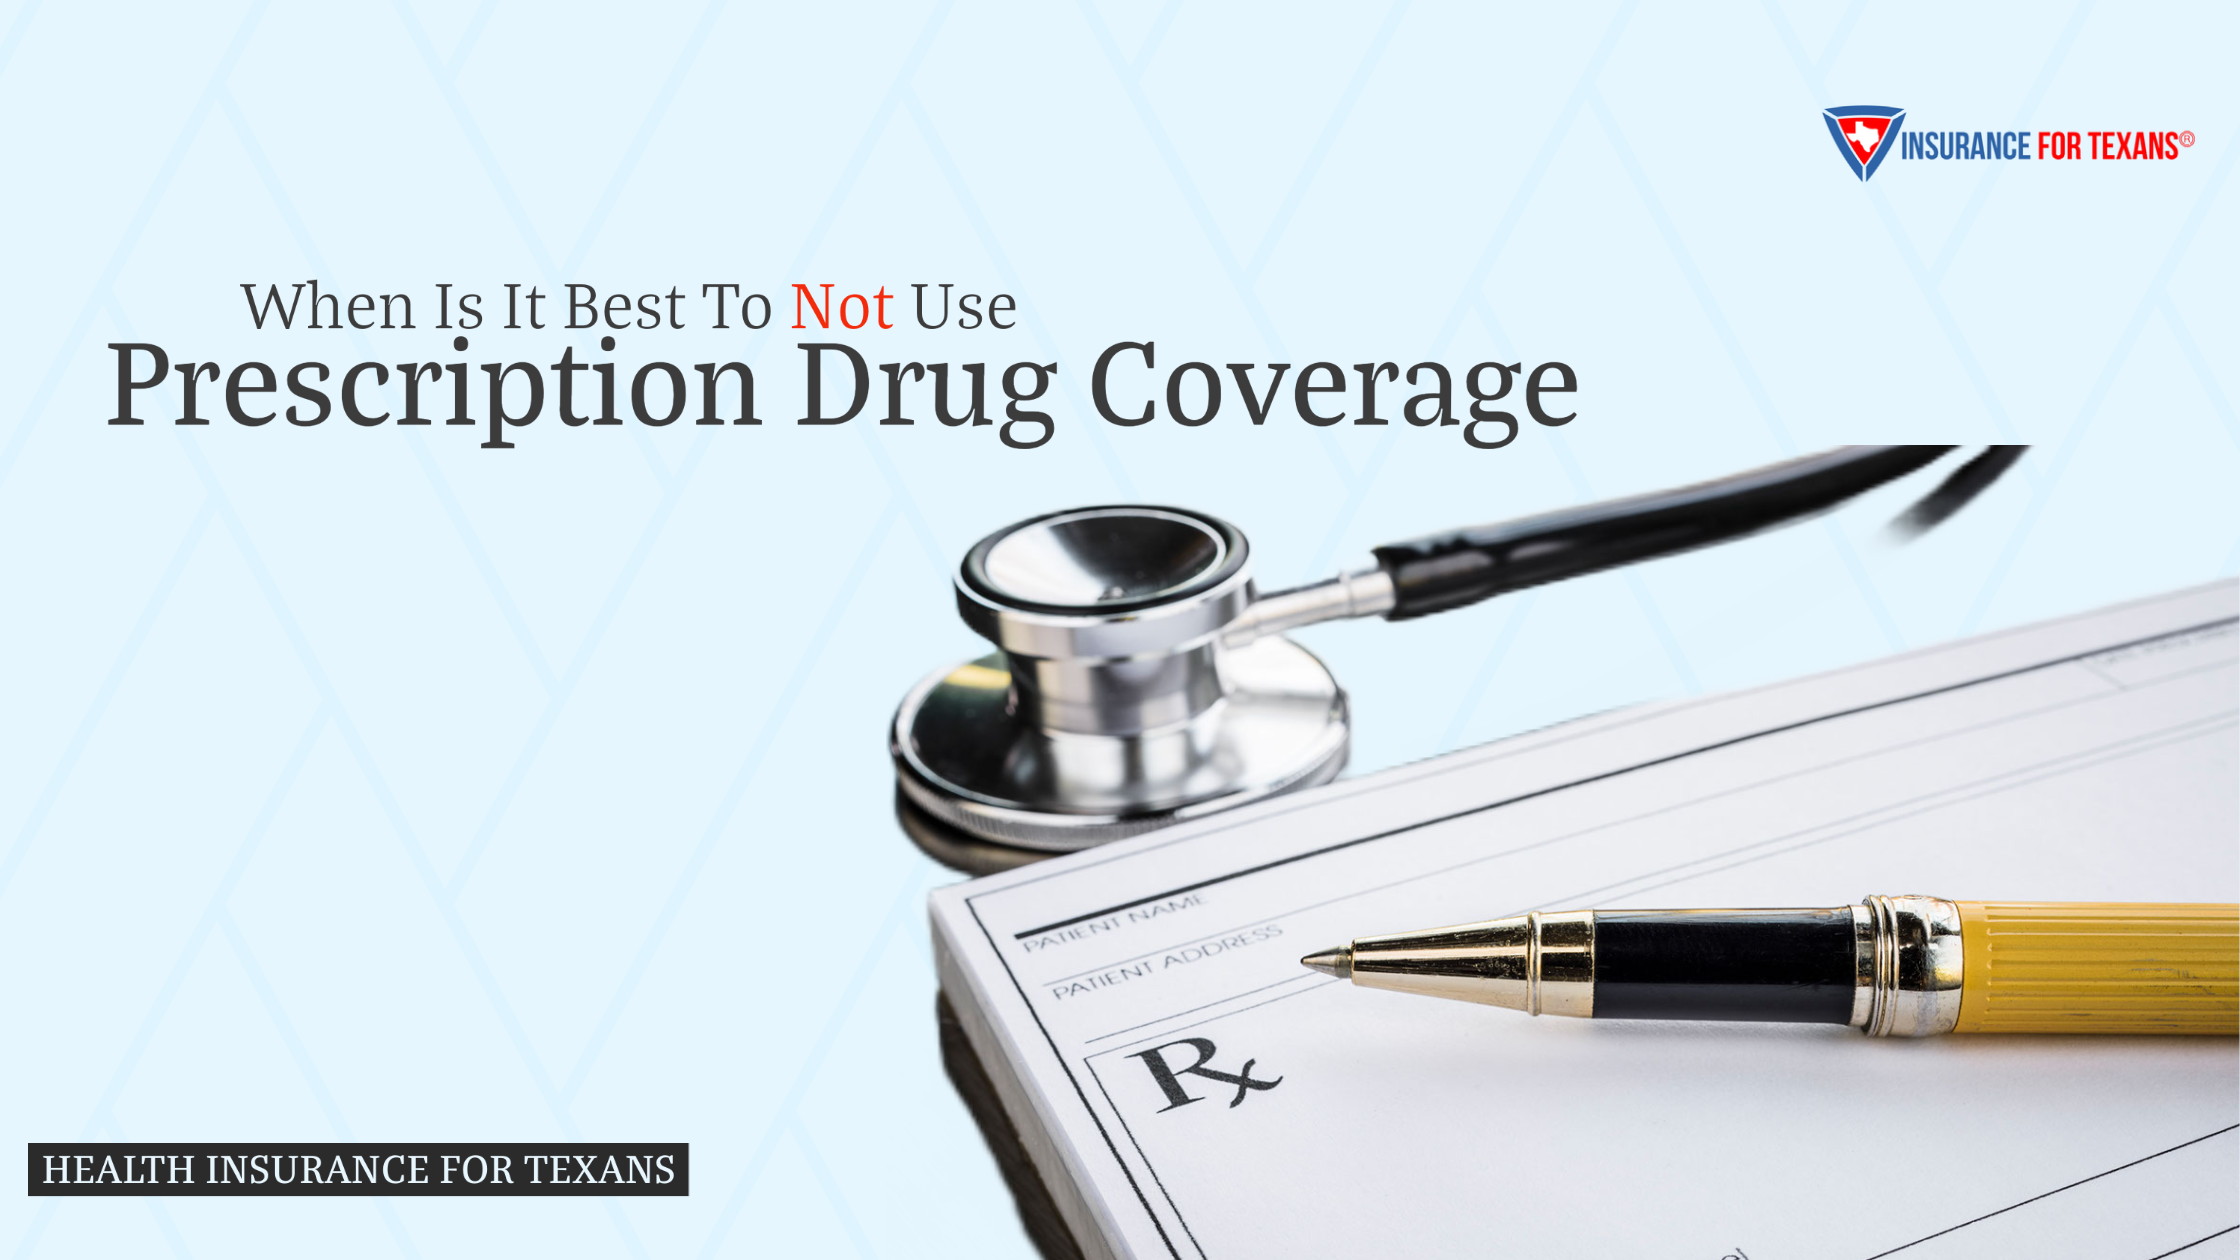 When Is It Best To Not Use Prescription Drug Coverage?